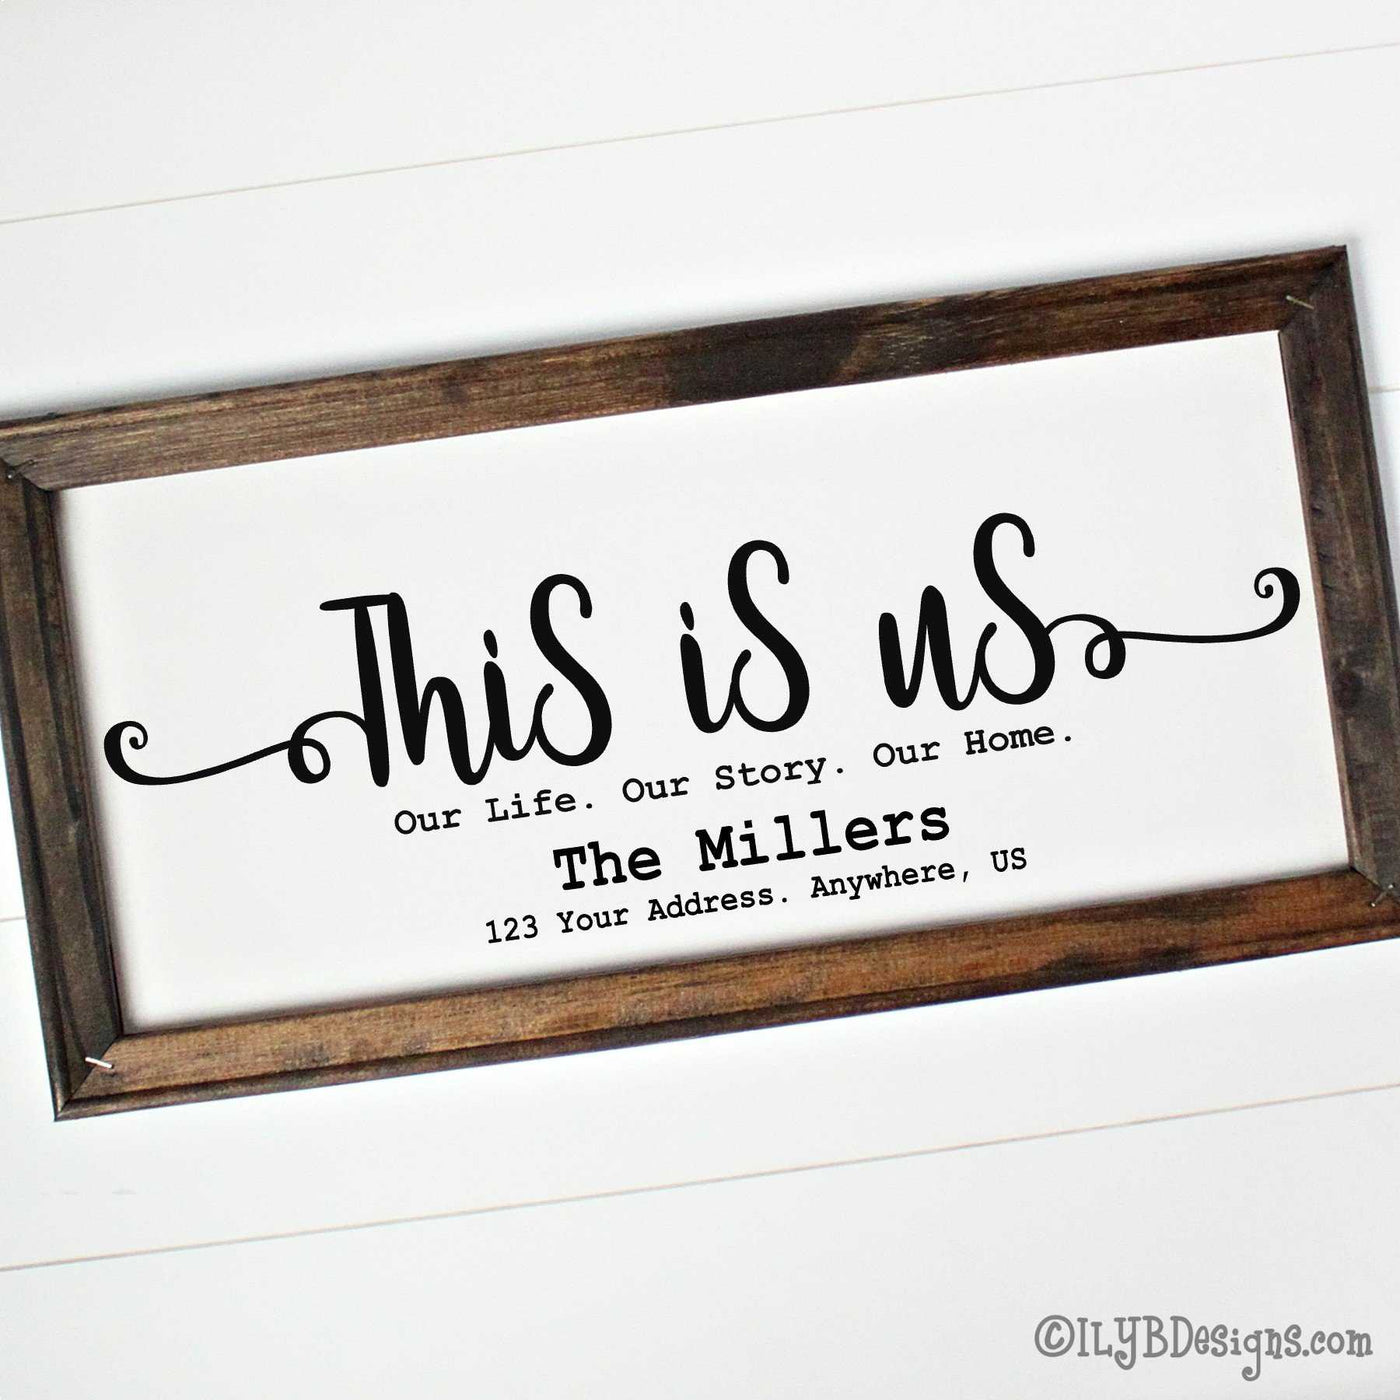 Dark walnut stained 20"x10" framed canvas with "This is us" in a black script font followed by a typewriter font that says, "Our Life. Our Story. Our Home." An optional family name is underneath those words. An optional address in under the family name.